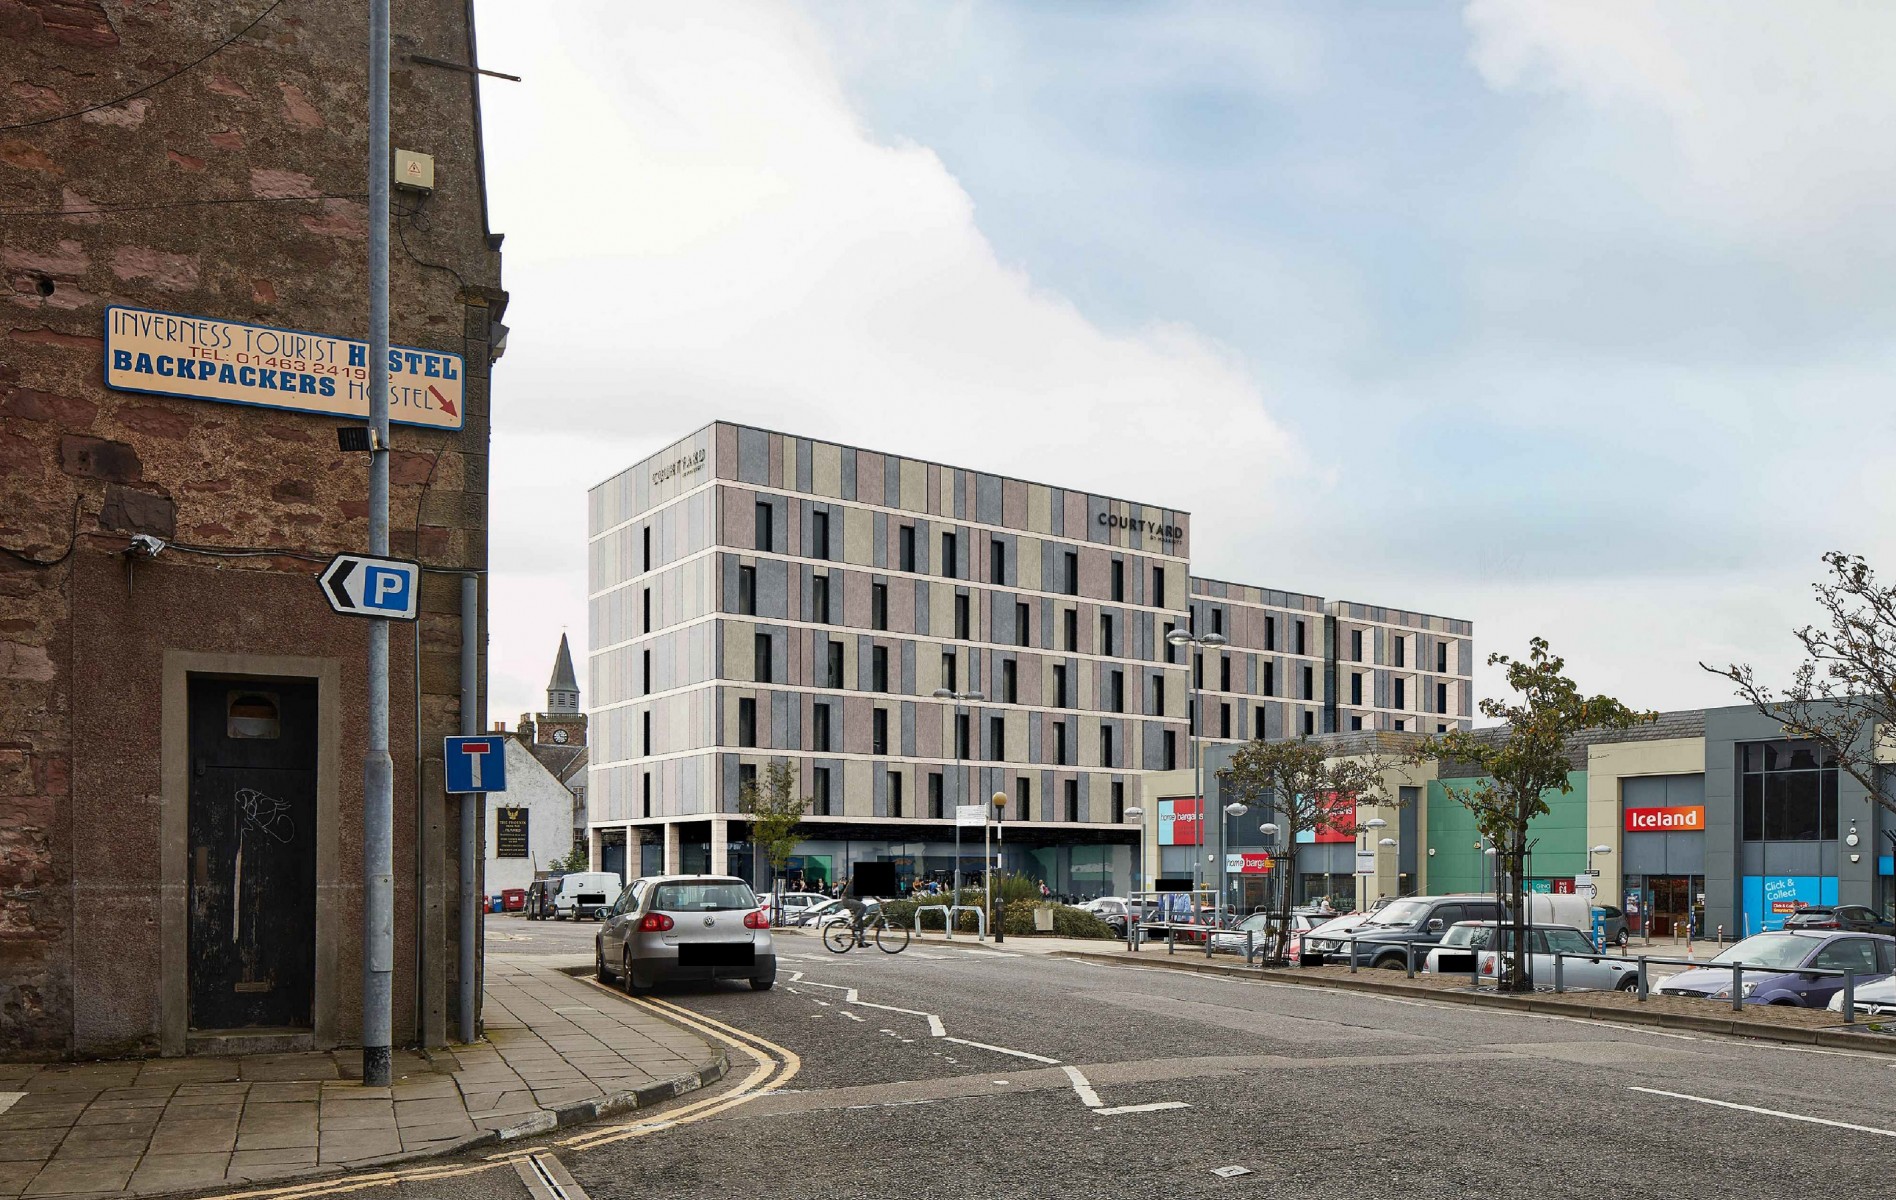 Marriott hotel planned for site of Inverness music venue